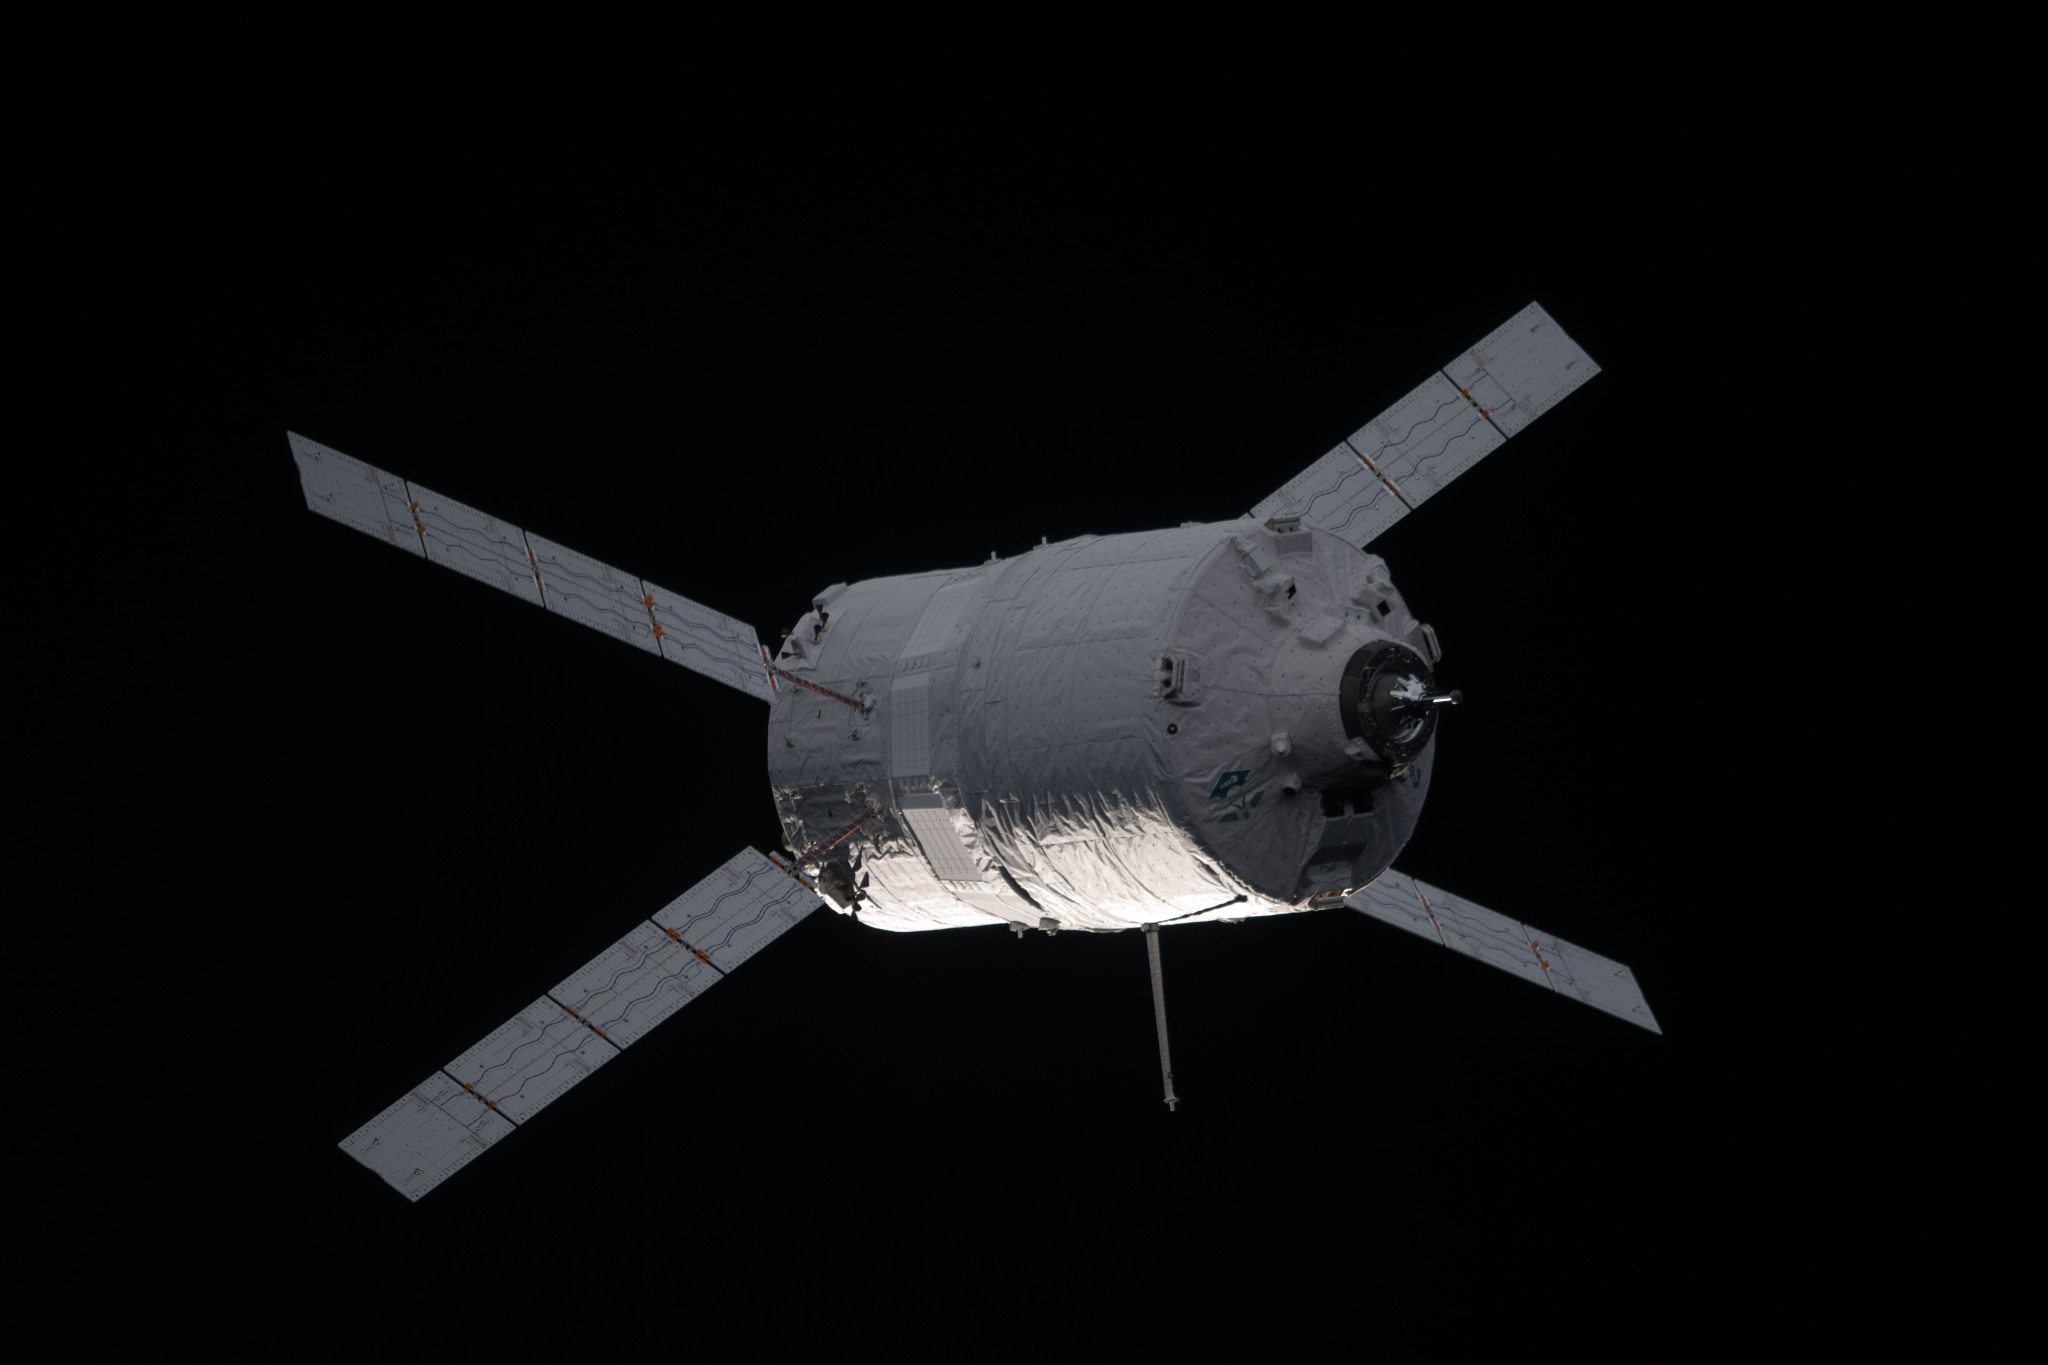 European Space Agency's "Edoardo Amaldi" Automated Transfer Vehicle-3 (ATV-3) approaches the International Space Station. The unmanned cargo spacecraft docked to the space station at 6:31 p.m. (EDT) on March 28, 2012, delivering 220 pounds of oxygen, 628 pounds of water, 4.5 tons of propellant, and nearly 2.5 tons of dry cargo, including experiment hardware, spare parts, food and clothing.